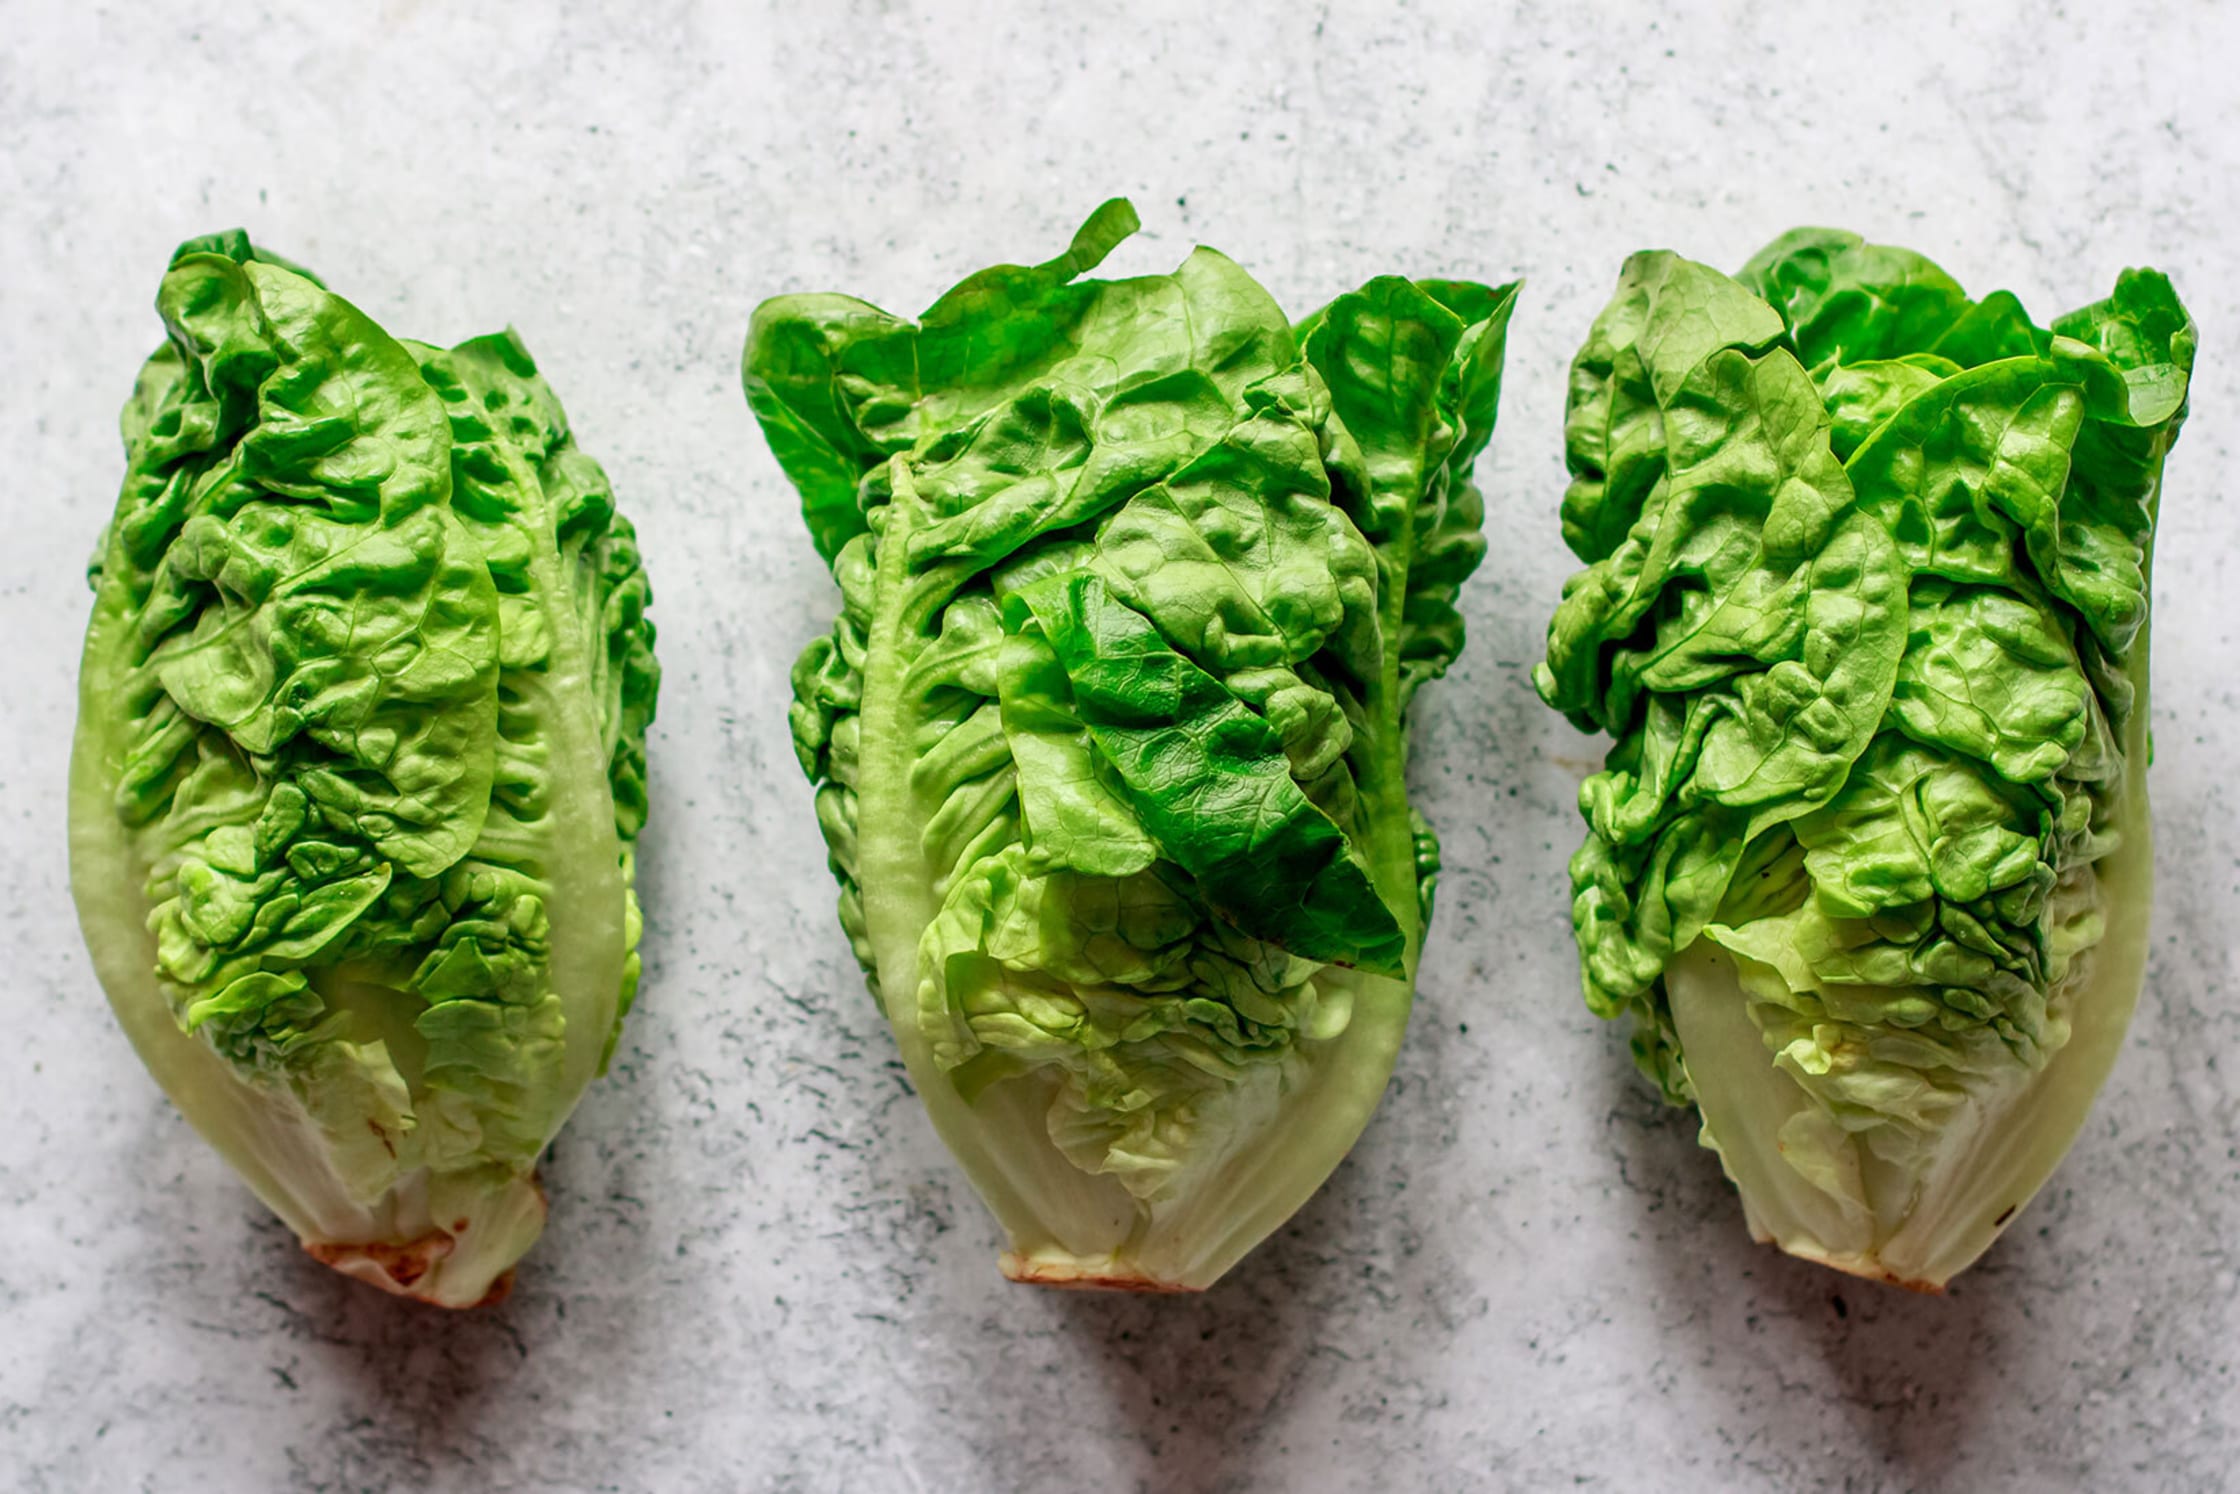 TikTok Says Lettuce Water Can Help You Sleep: What Does The Science Say?